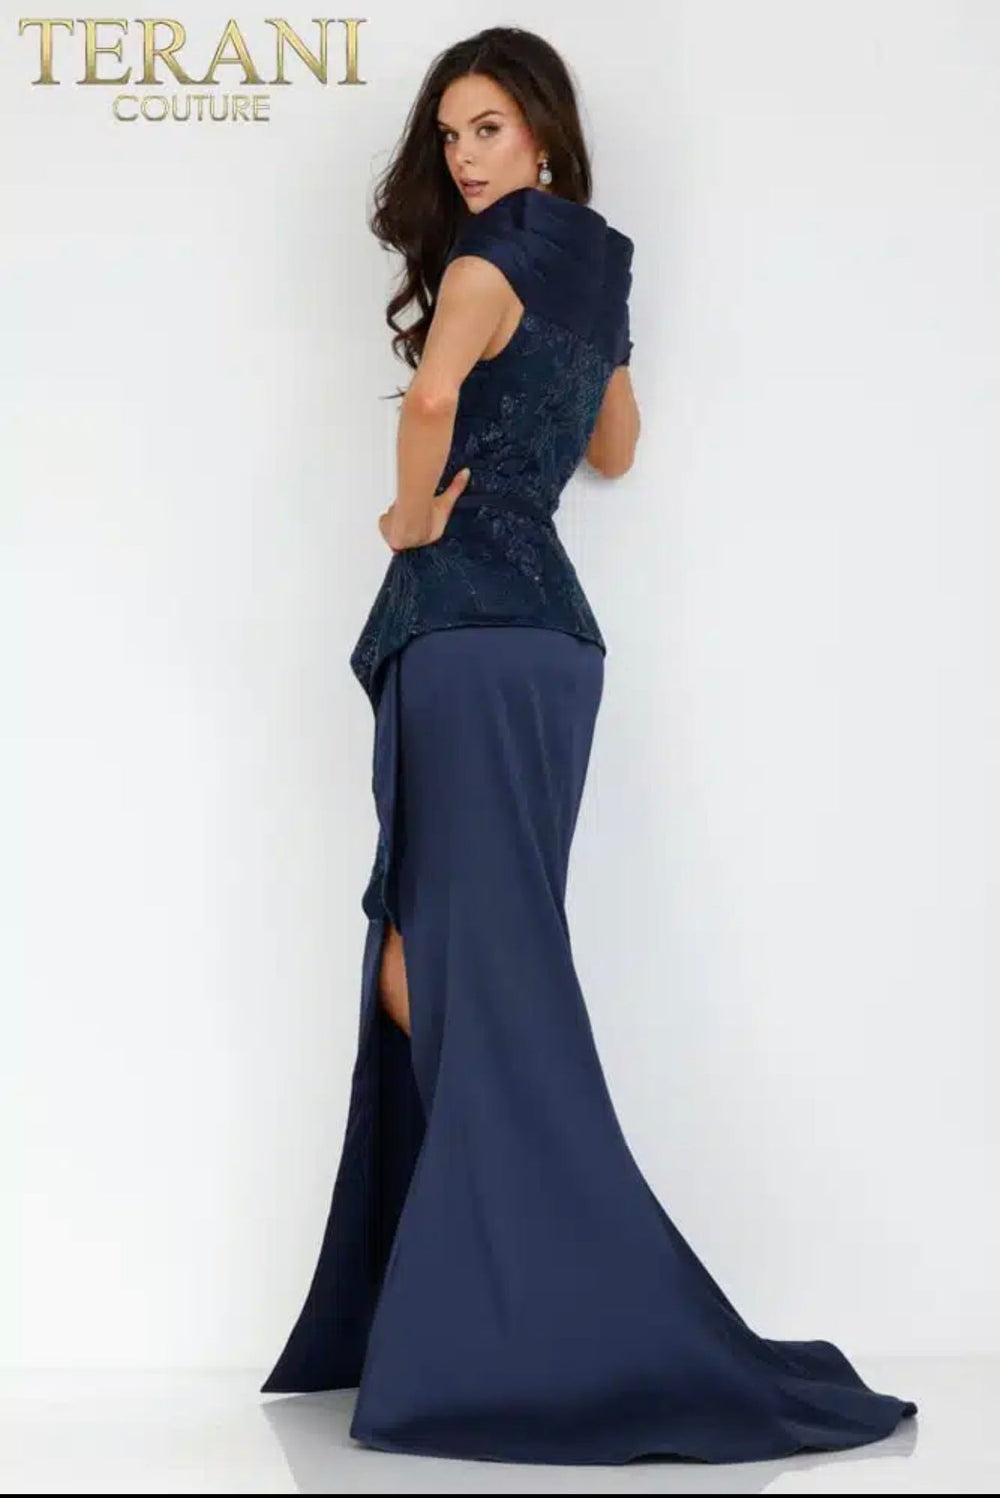 NorasBridalBoutiqueNY Terani Couture 231M0333 Peplum Shawl Style Formal Gown